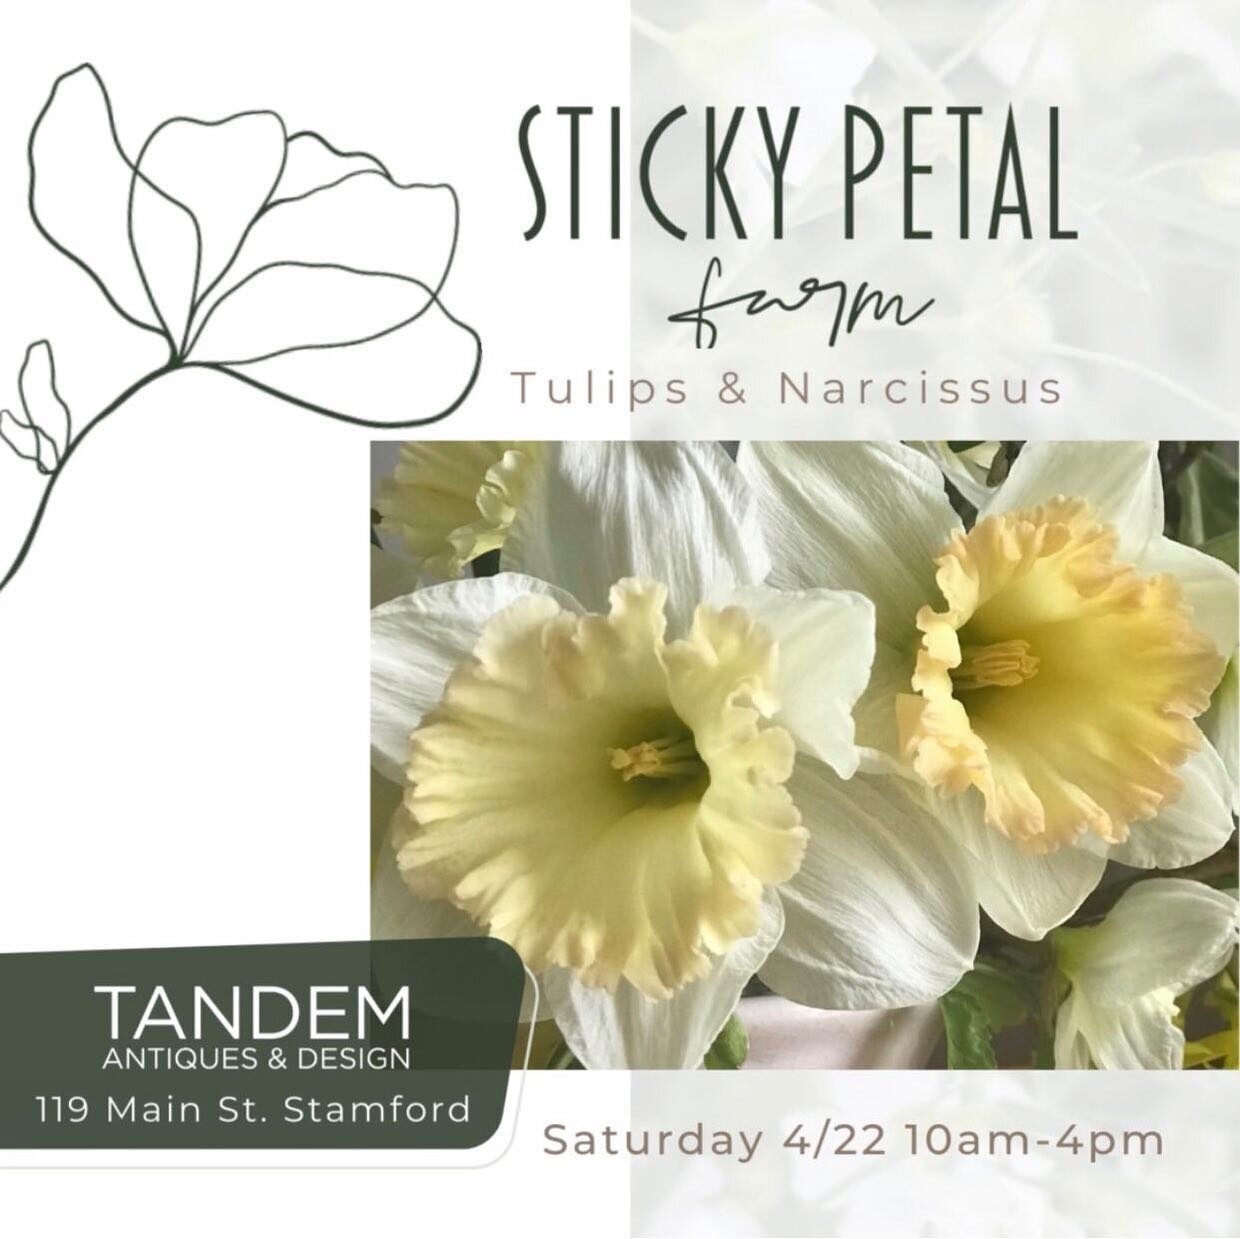 Super excited to share that @stickypetalfarm will be at Tandem Antiques this Saturday for the Stamford Vendor Market!!
Aren&rsquo;t we ALL ready for some flowers?!
The market is 10-4, all through Stamford. Our first ever Earth Day 5K happens that mor